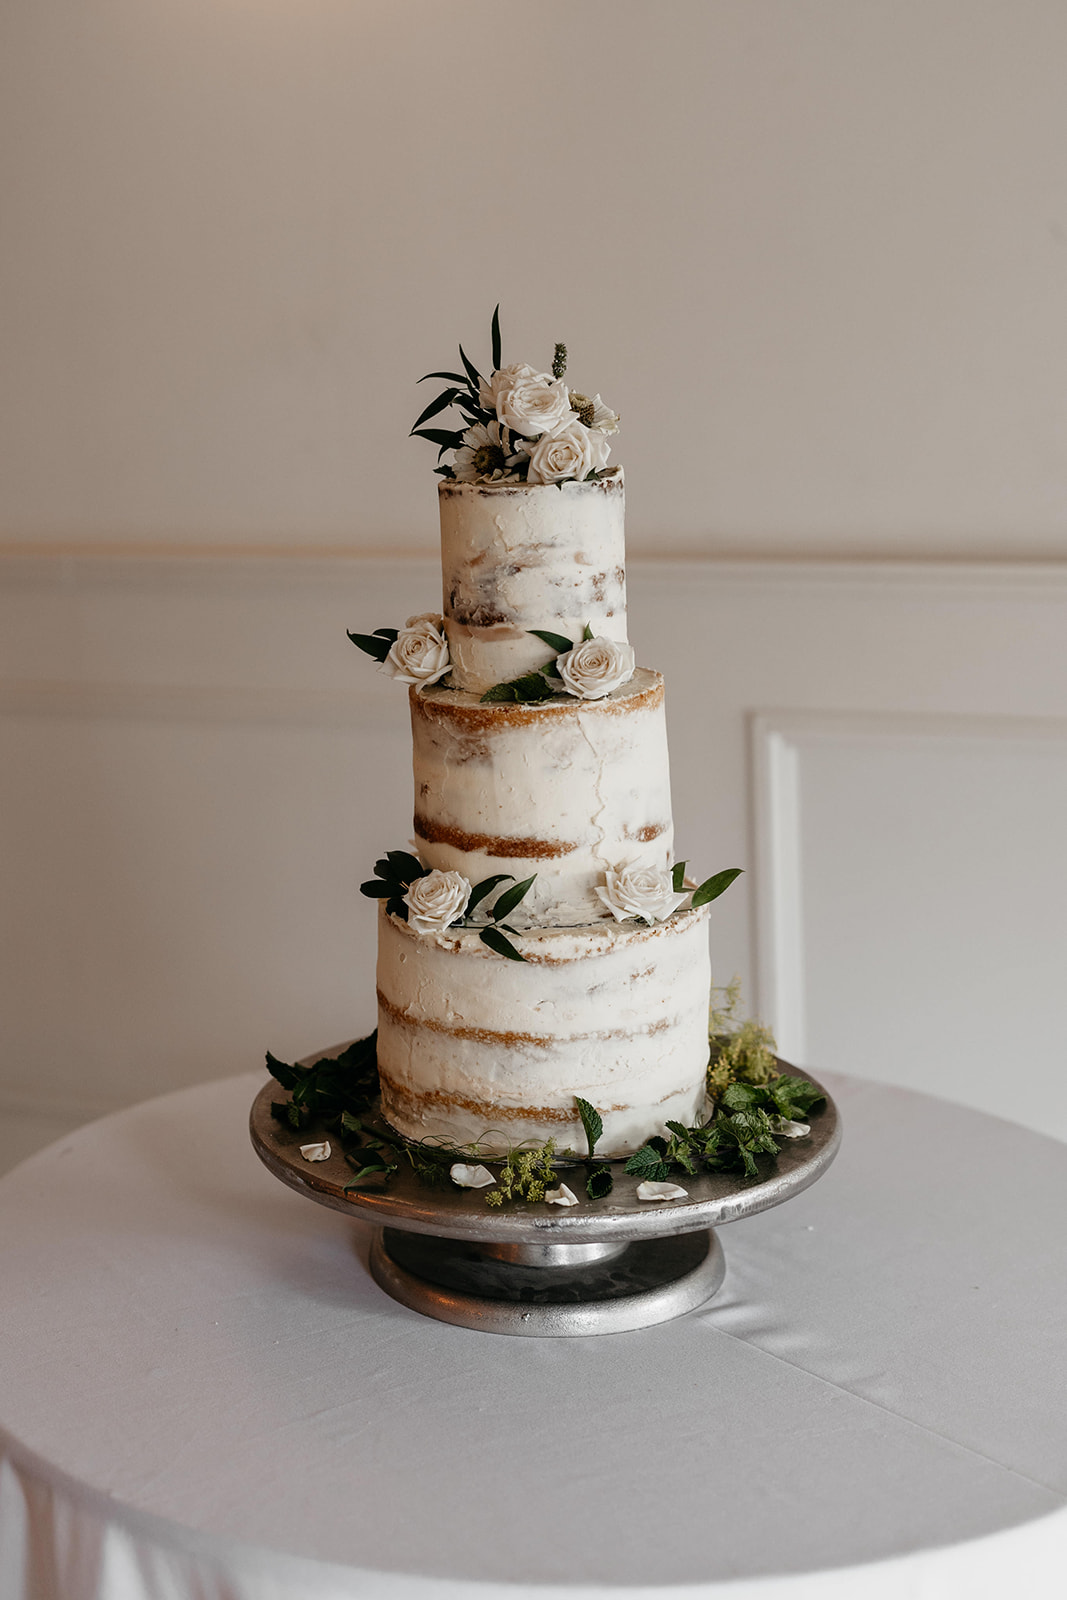 A three tiered naked wedding cake stands on a table covered in a white tablecloth and is garnished in green foliage and white roses